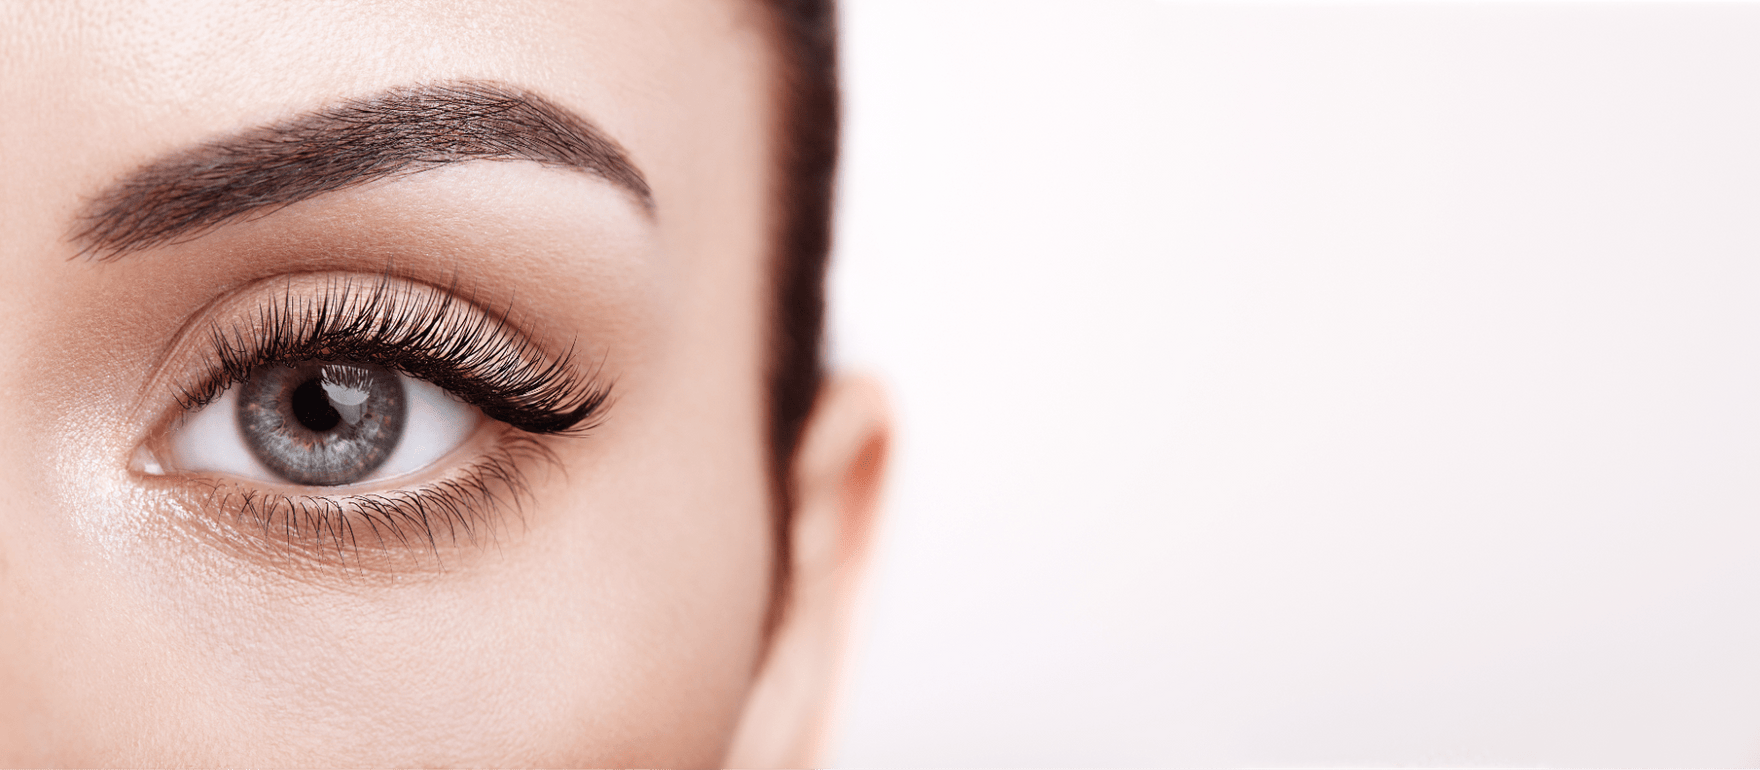 Closeup of a woman’s eye with lash extensions